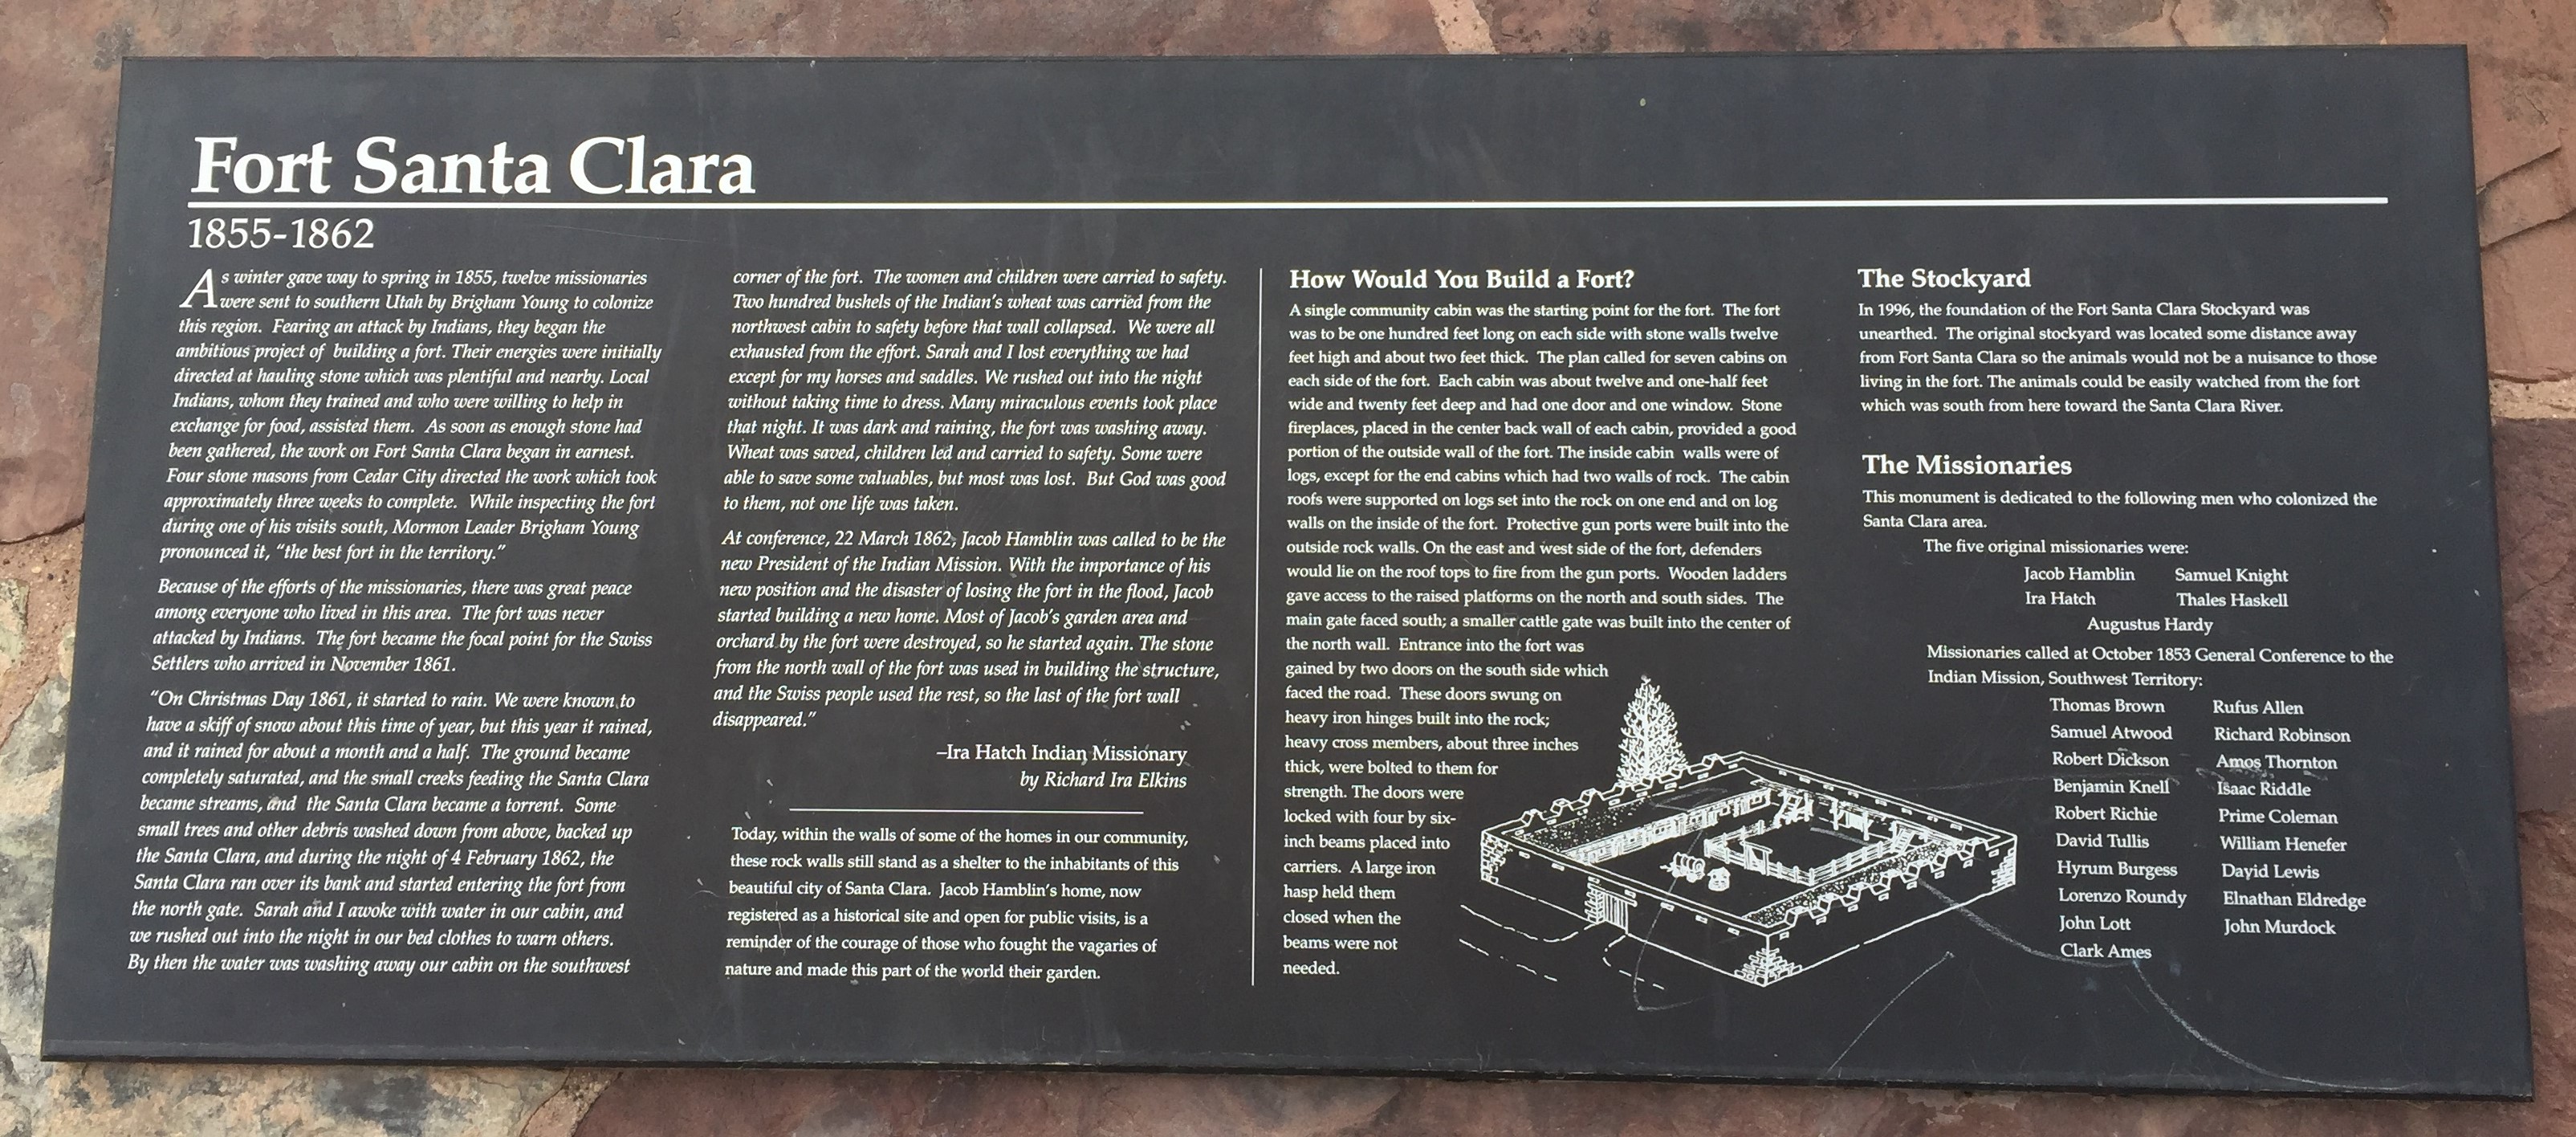 The interpretive plaque at the site of the old Fort Clara